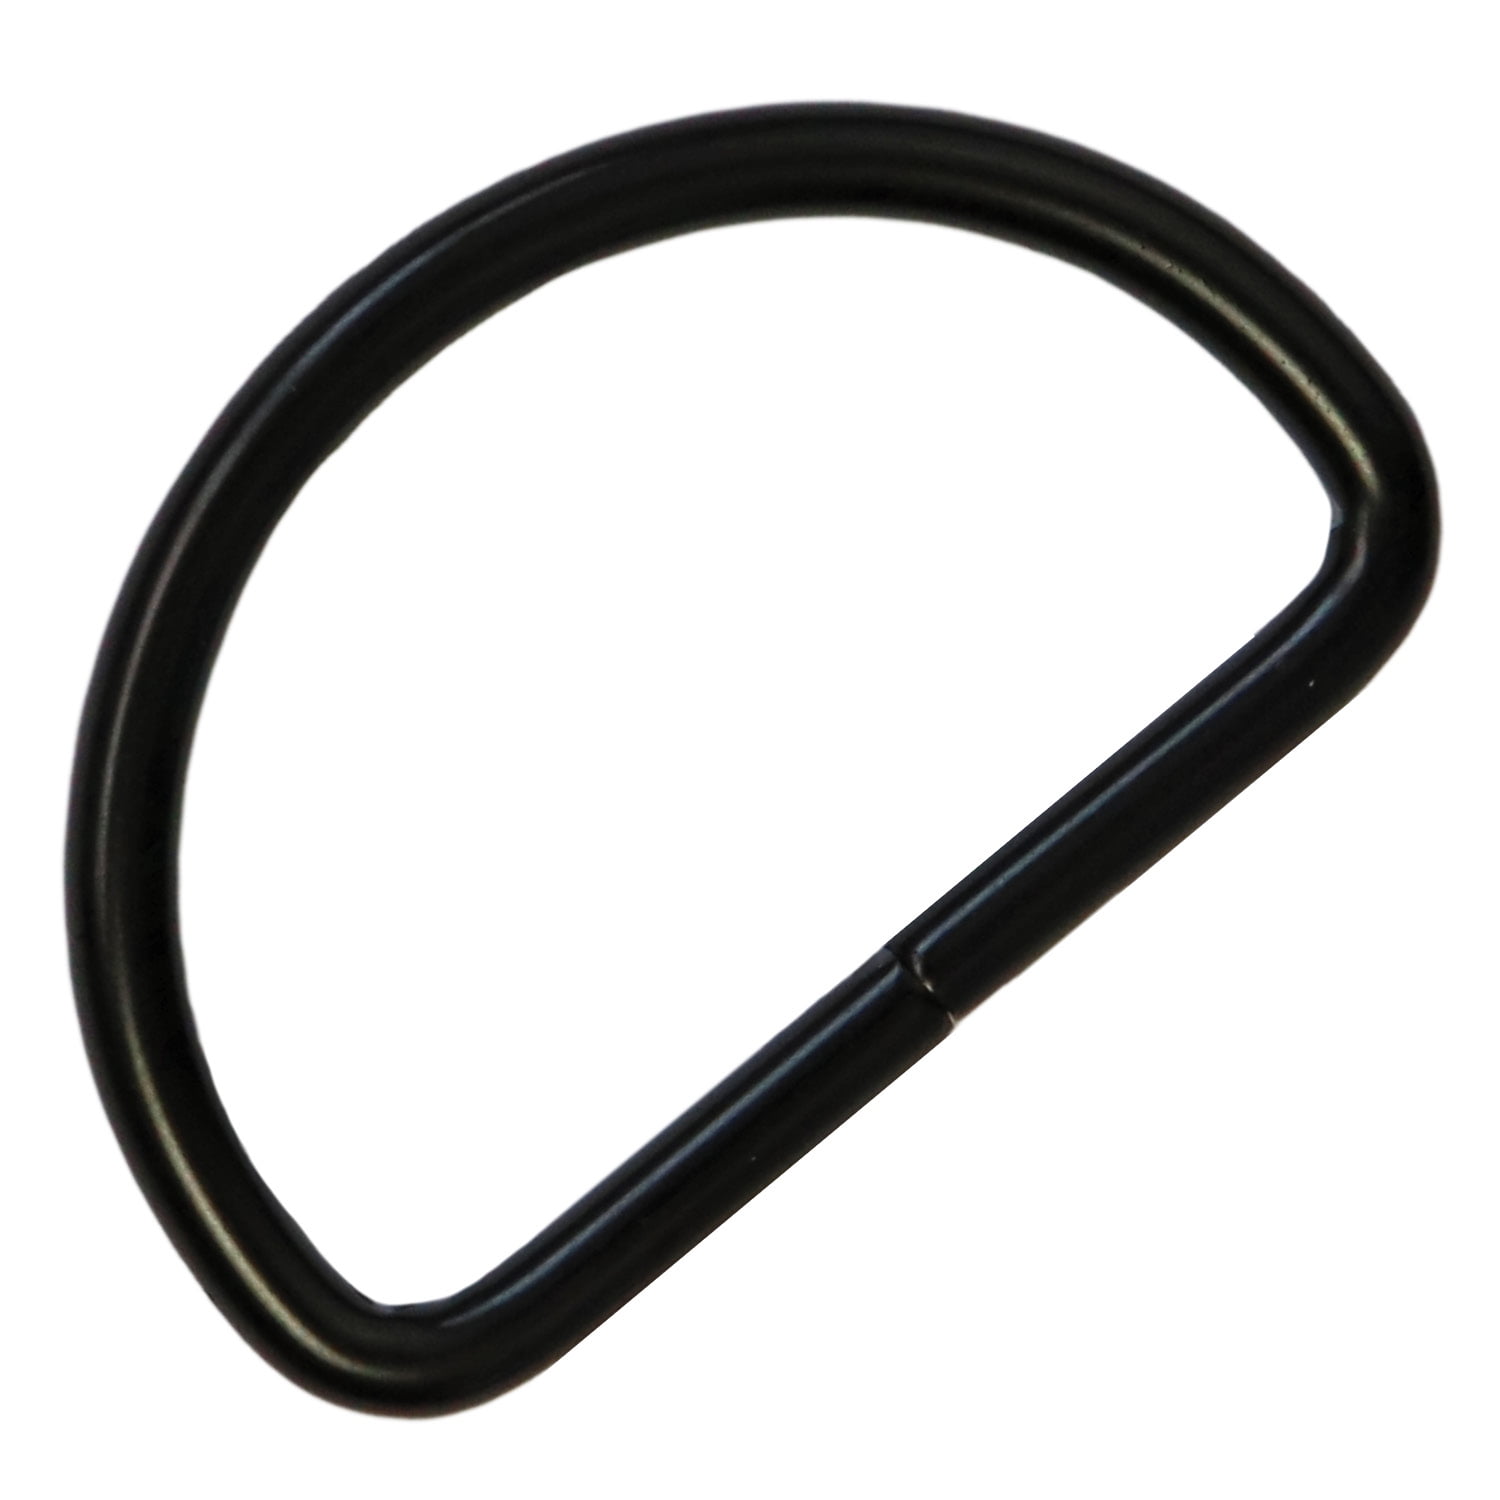 CrocSee Metal D Ring 1 inch Non Welded Nickel Plated Pack Of 100 Large